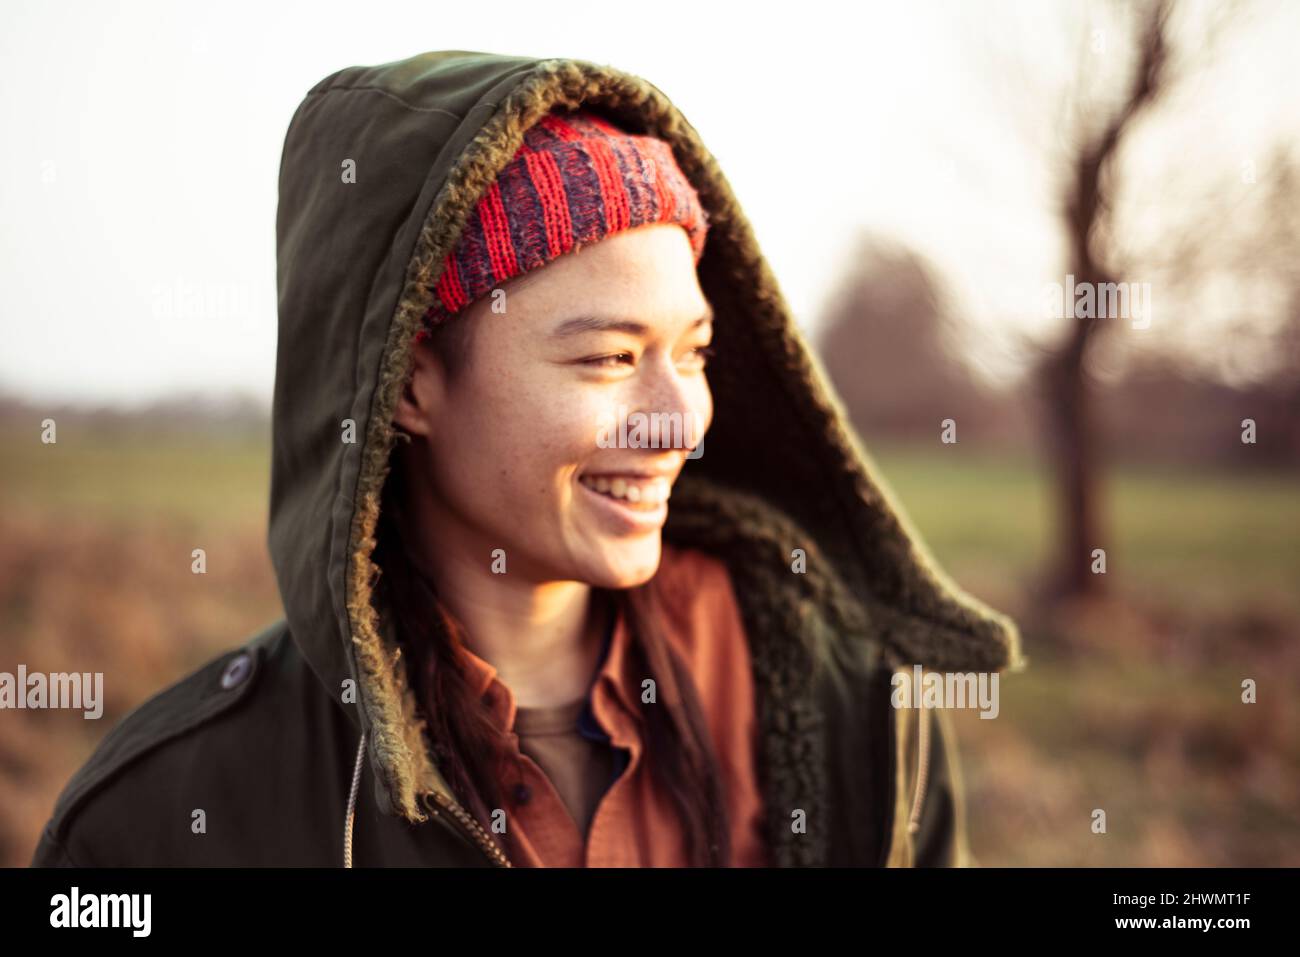 non-binary person in warm jacket hood smiles in afternoon sun outdoors Stock Photo